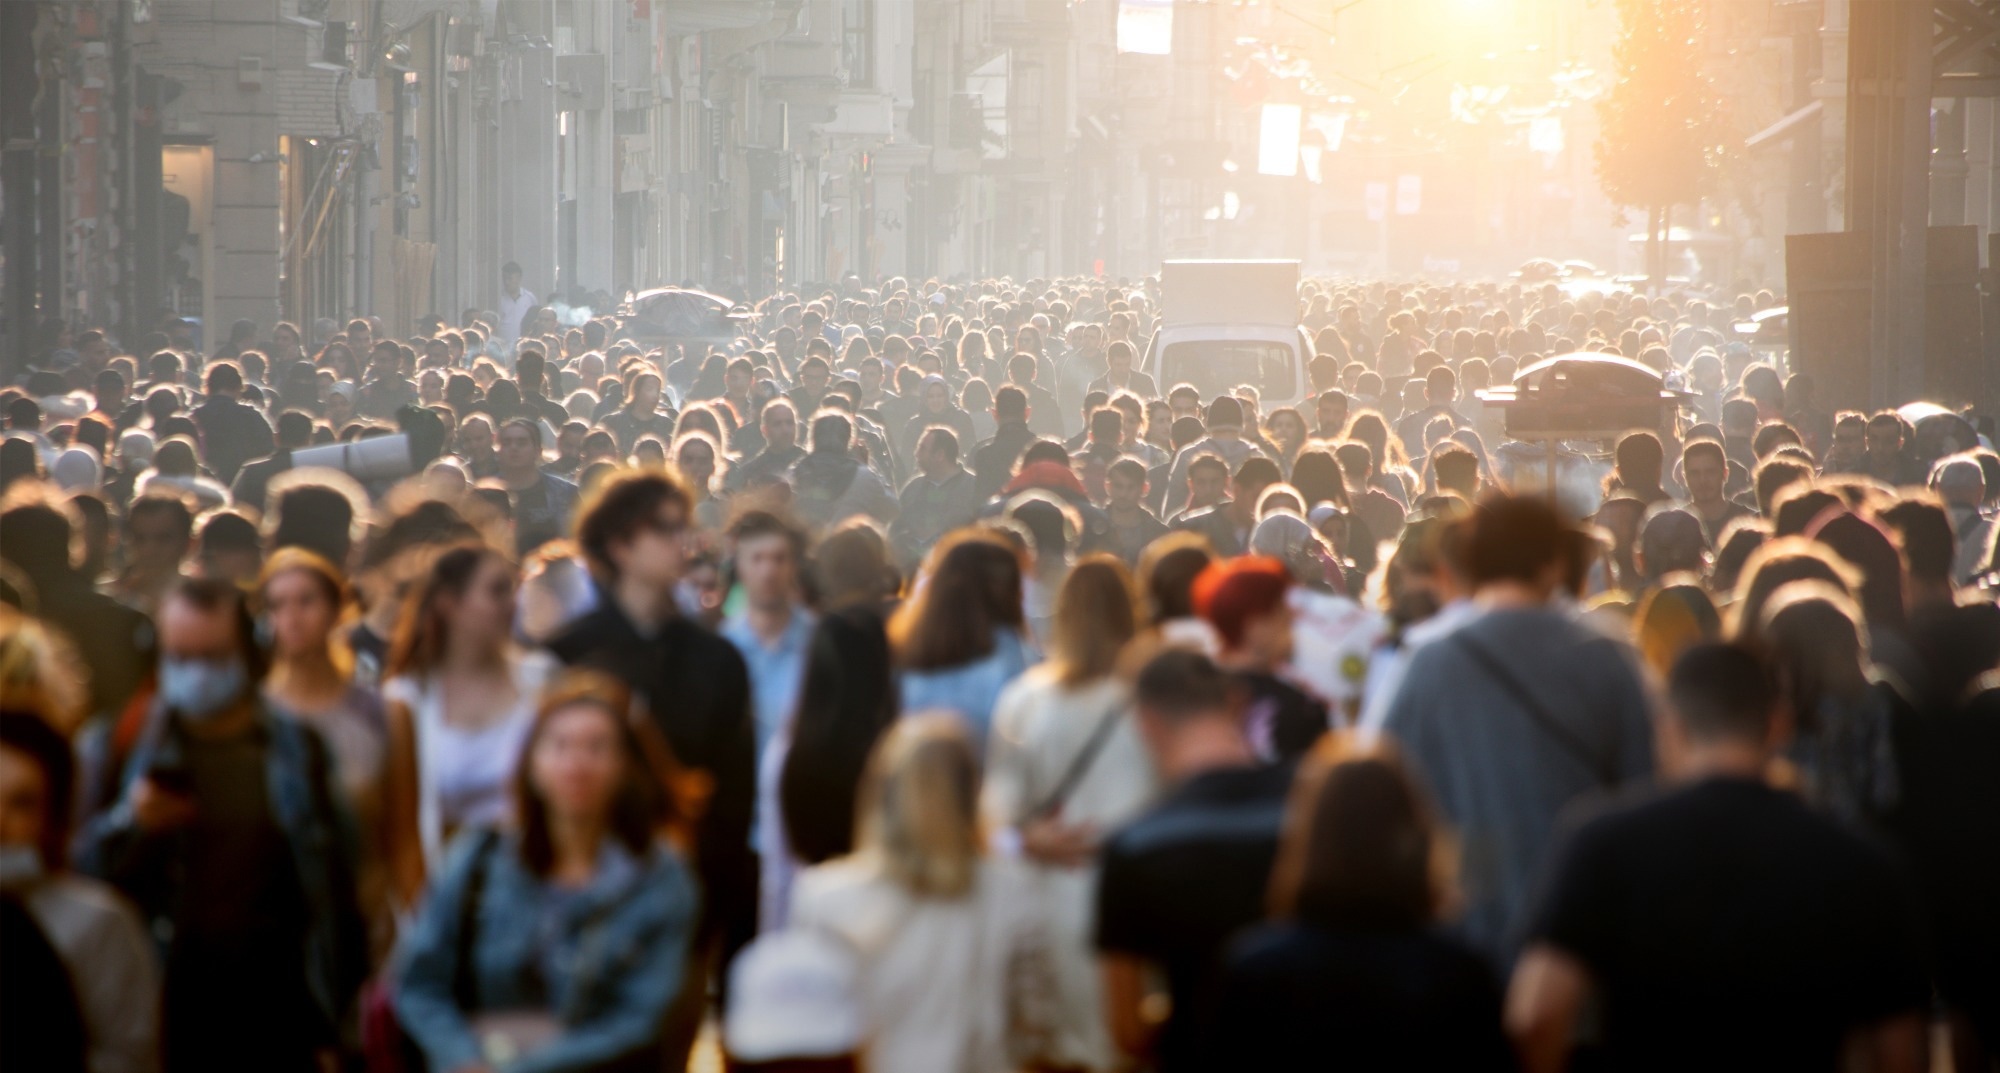 Study: Effects of urban living environments on mental health in adults. Image Credit: Aleksandr Ozerov / Shutterstock.com